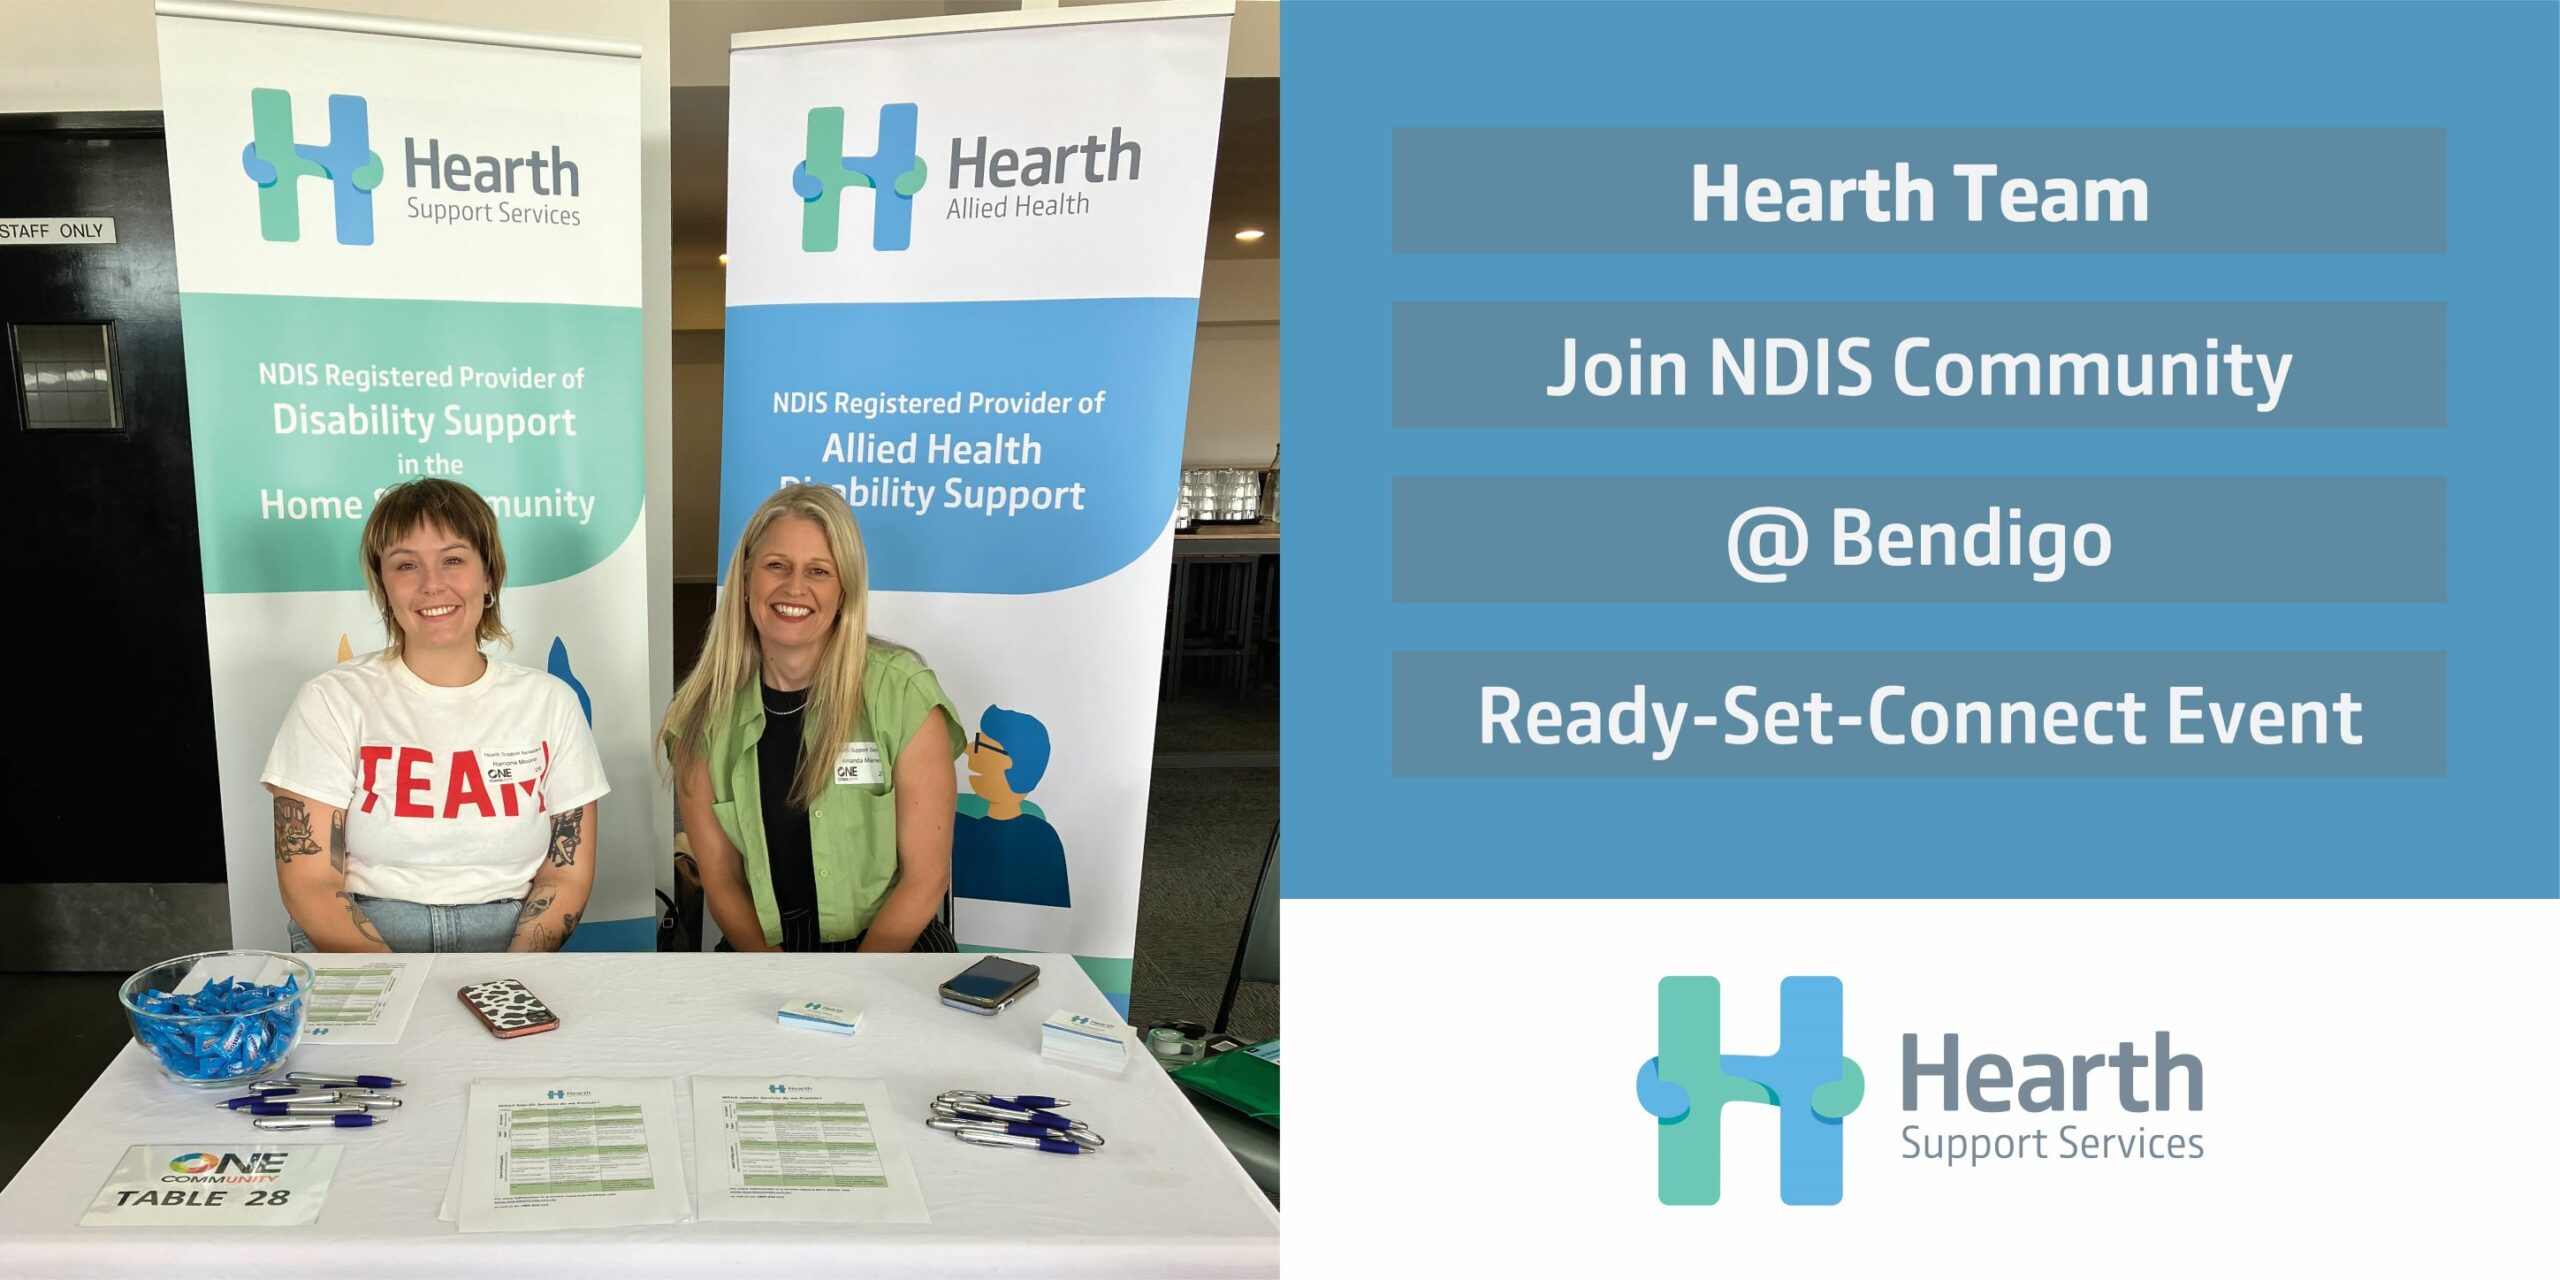 Hearth Team Join NDIS Community at Bendigo Ready-Set-Connect Event